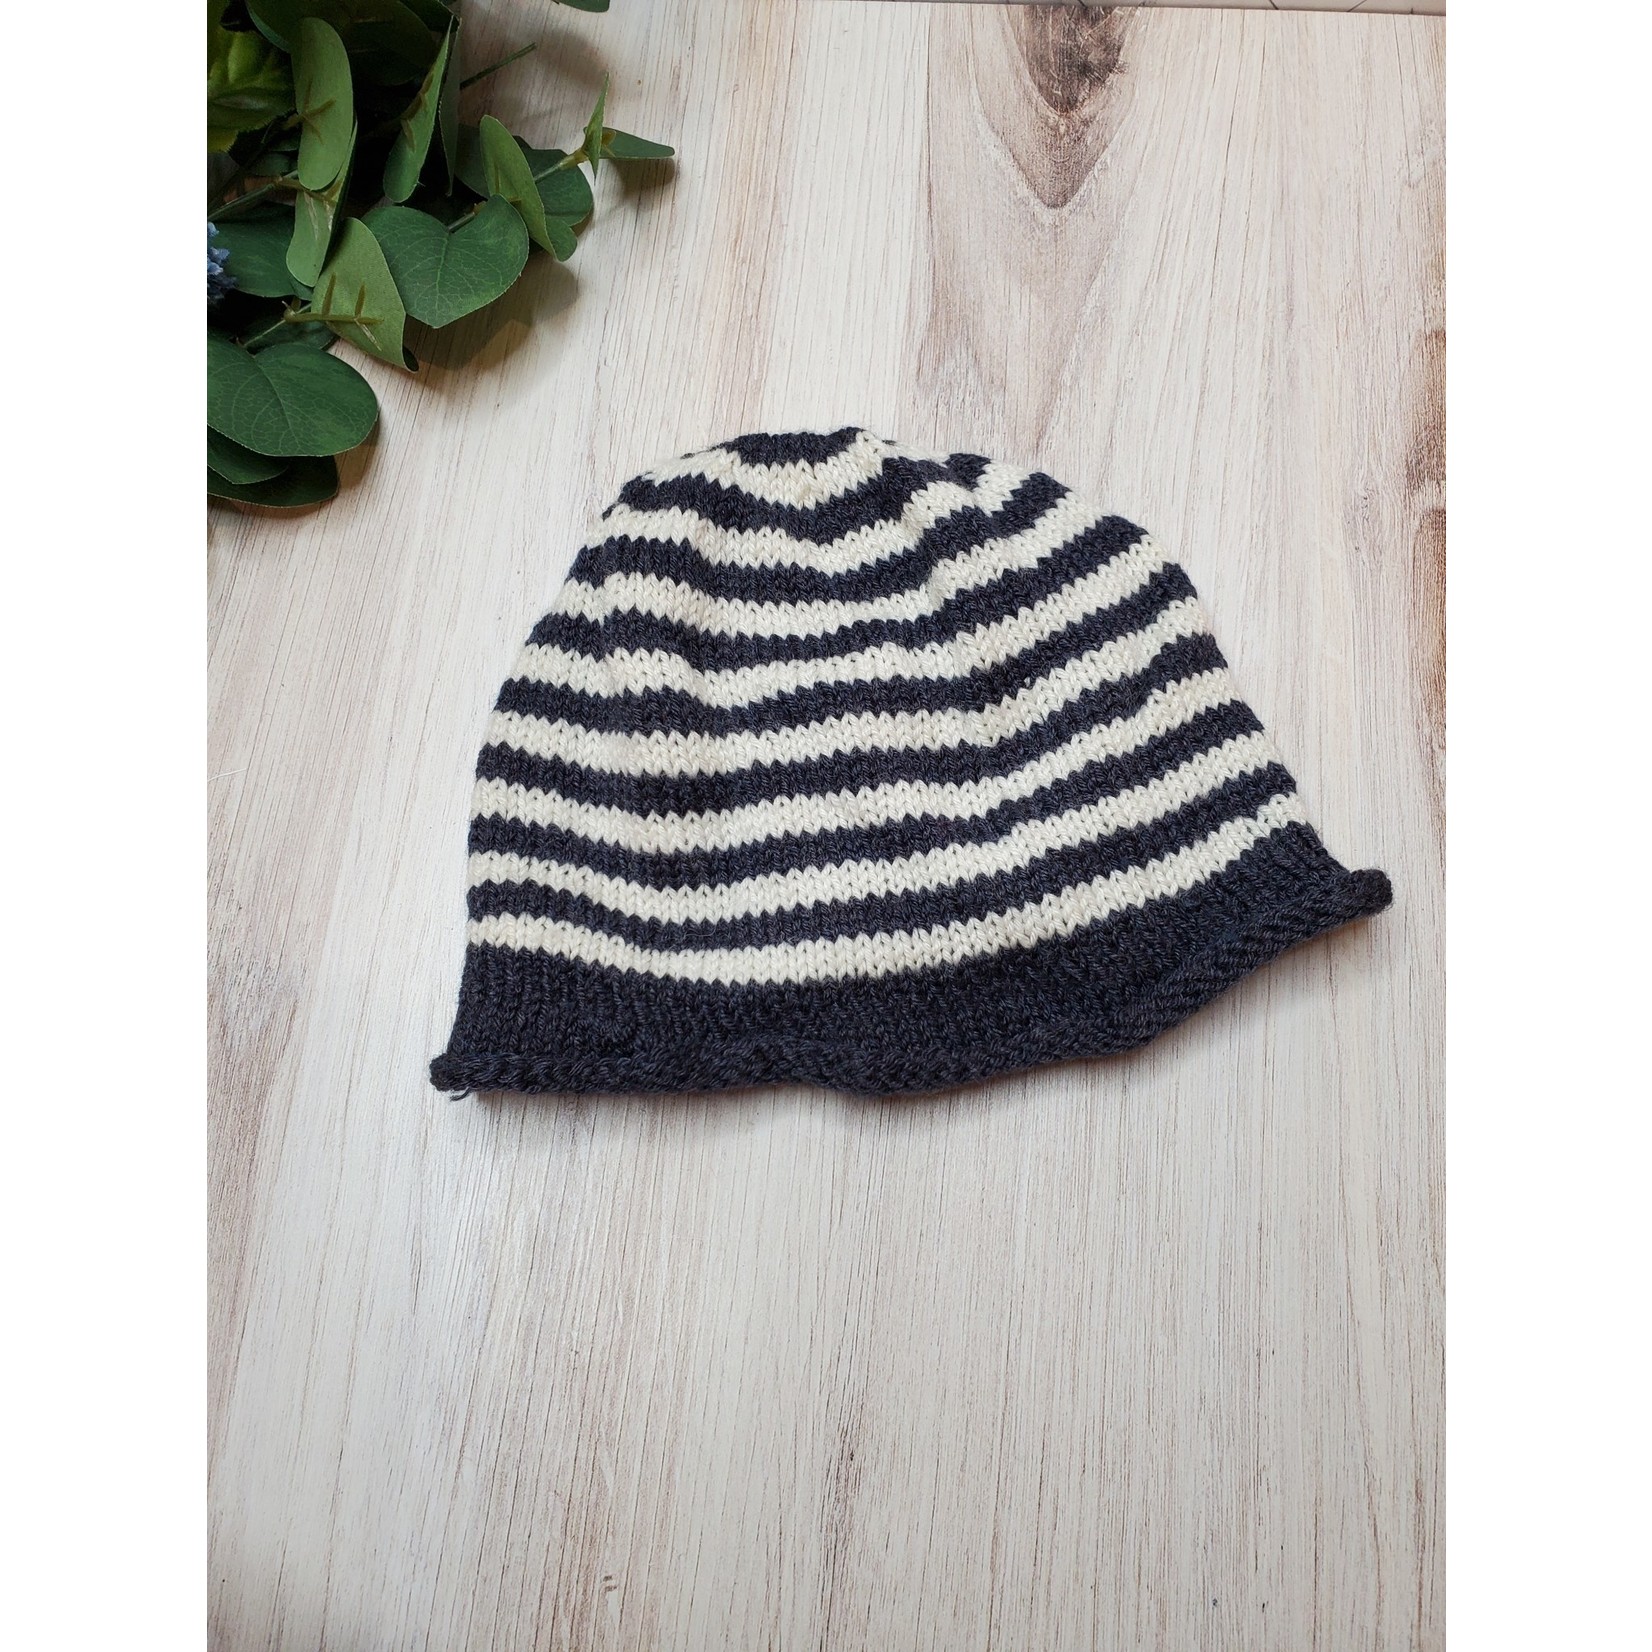 Roan's Repertoire Baby Hat - Knitted - Black & White Striped